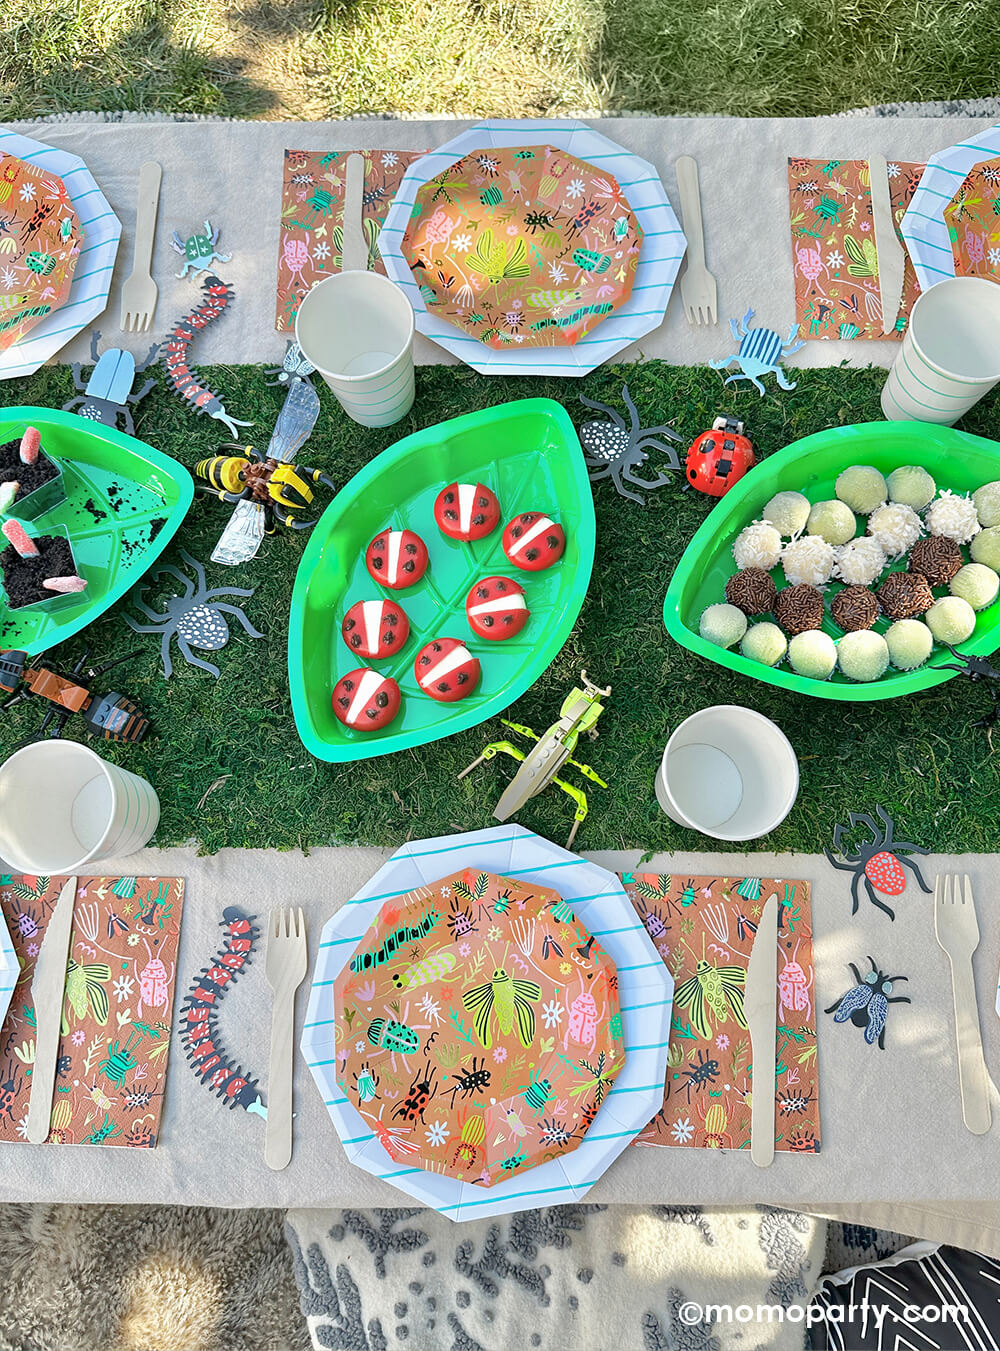 An insect bug themed birthday party table styled by Momo Party features backyard bug plates, napkins with aqua striped plates and party cups by Daydream Society. In the middle there's a faux grass table runner that was decorated with various lego insect toys and palm leaf shaped serving tray filled with insect themed treats and snacks including gummy worms, ladybug babybel cheeses and bug egg shaped brigadeiros, some playful and fun ideas for kid's insect themed bash.